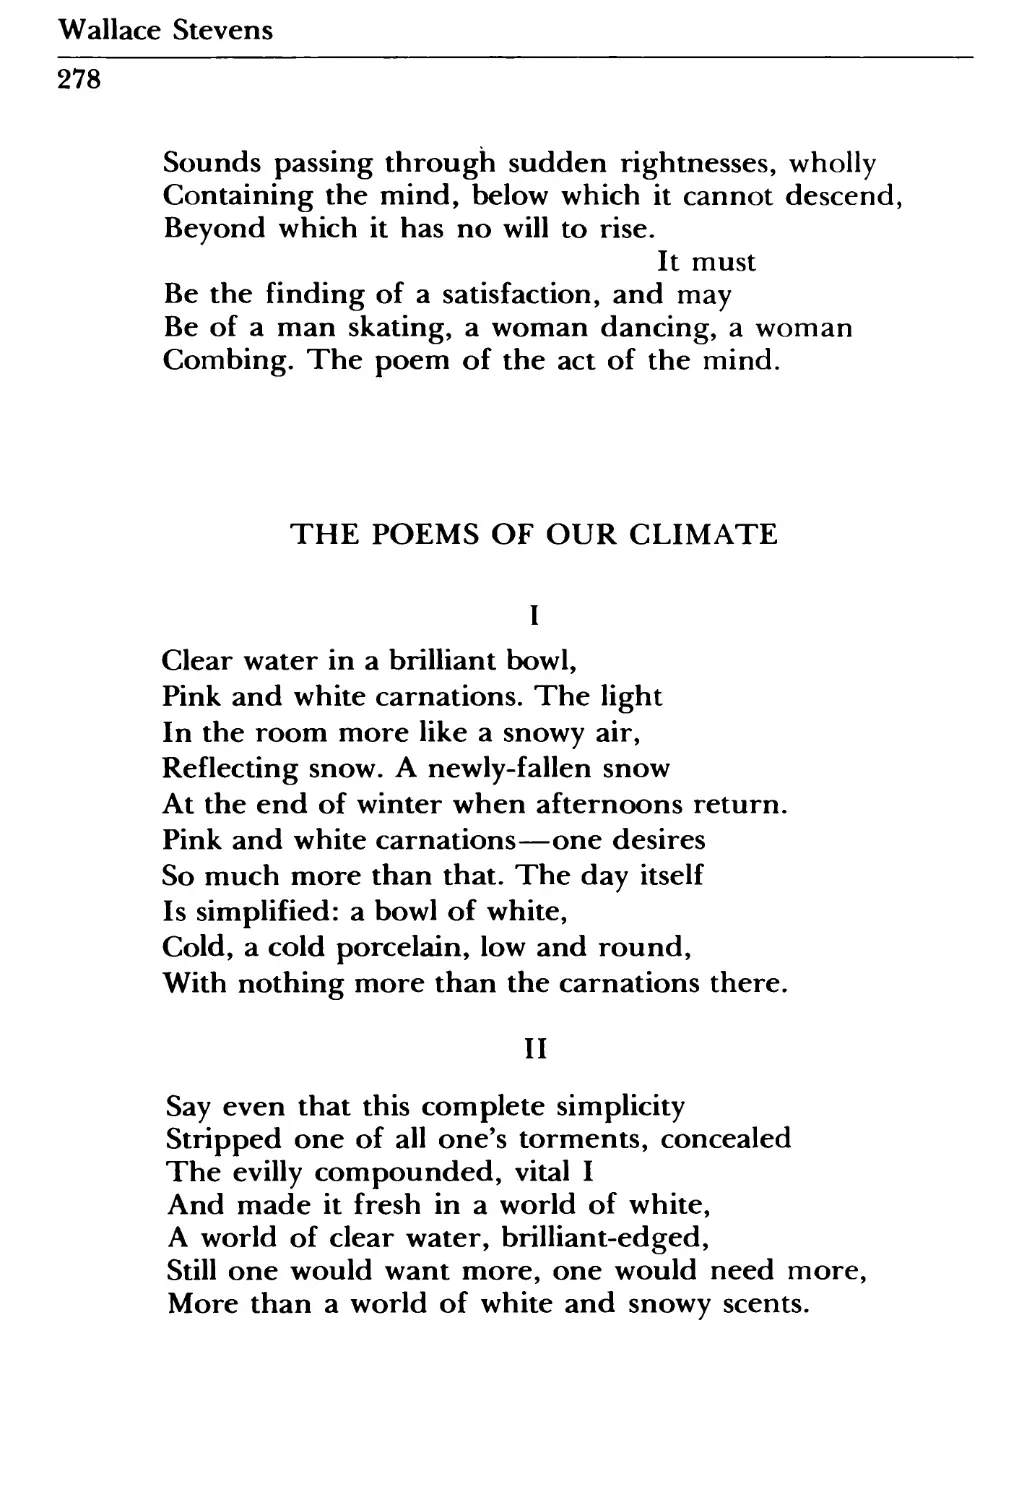 The Poems of Our Climate